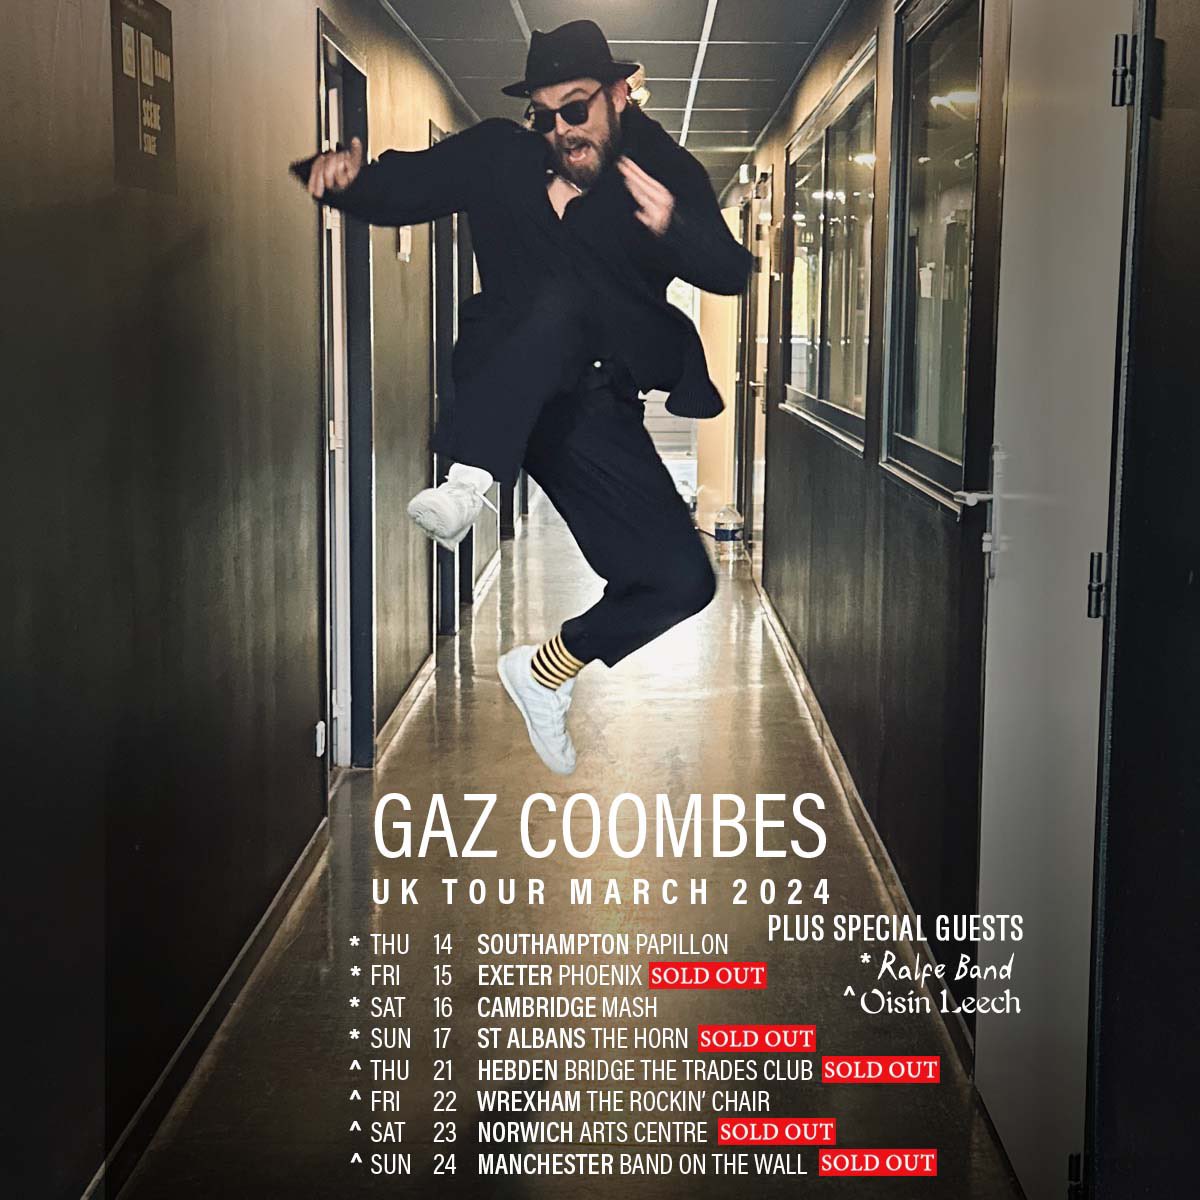 Very excited to say that I’ll be opening for @GazCoombes on some of his shows next month. See you there!